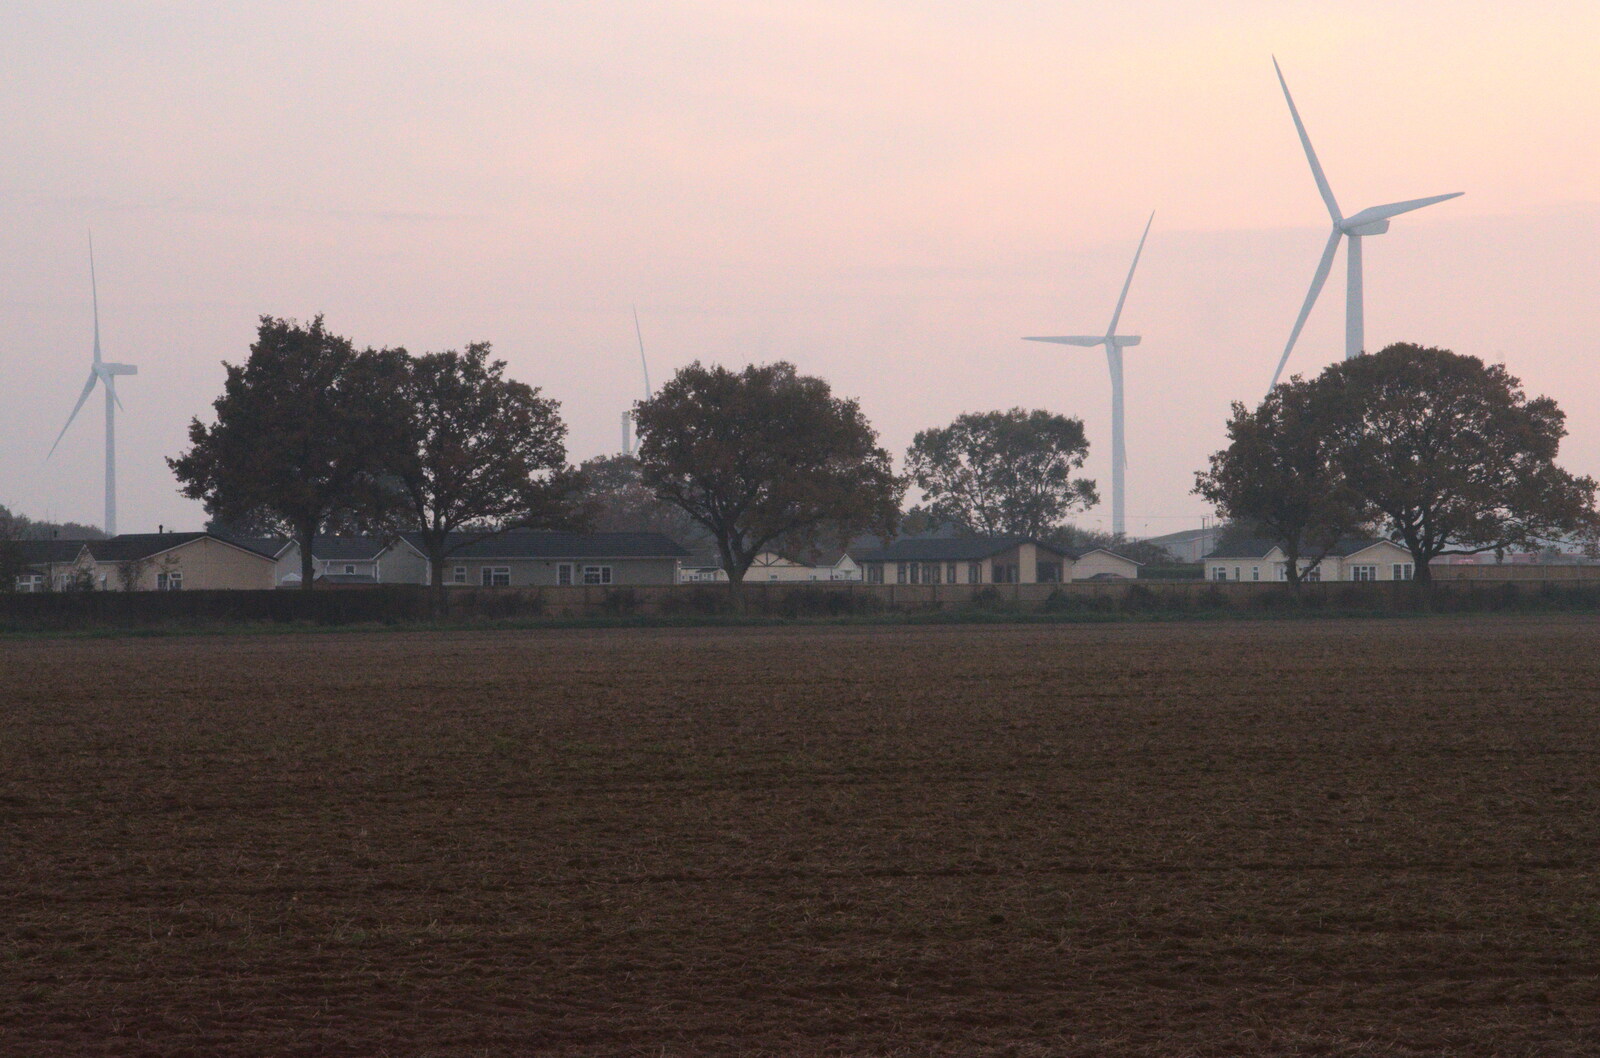 Turbines in the dusk from To See the Hairy Pigs, Thrandeston, Suffolk - 7th November 2020